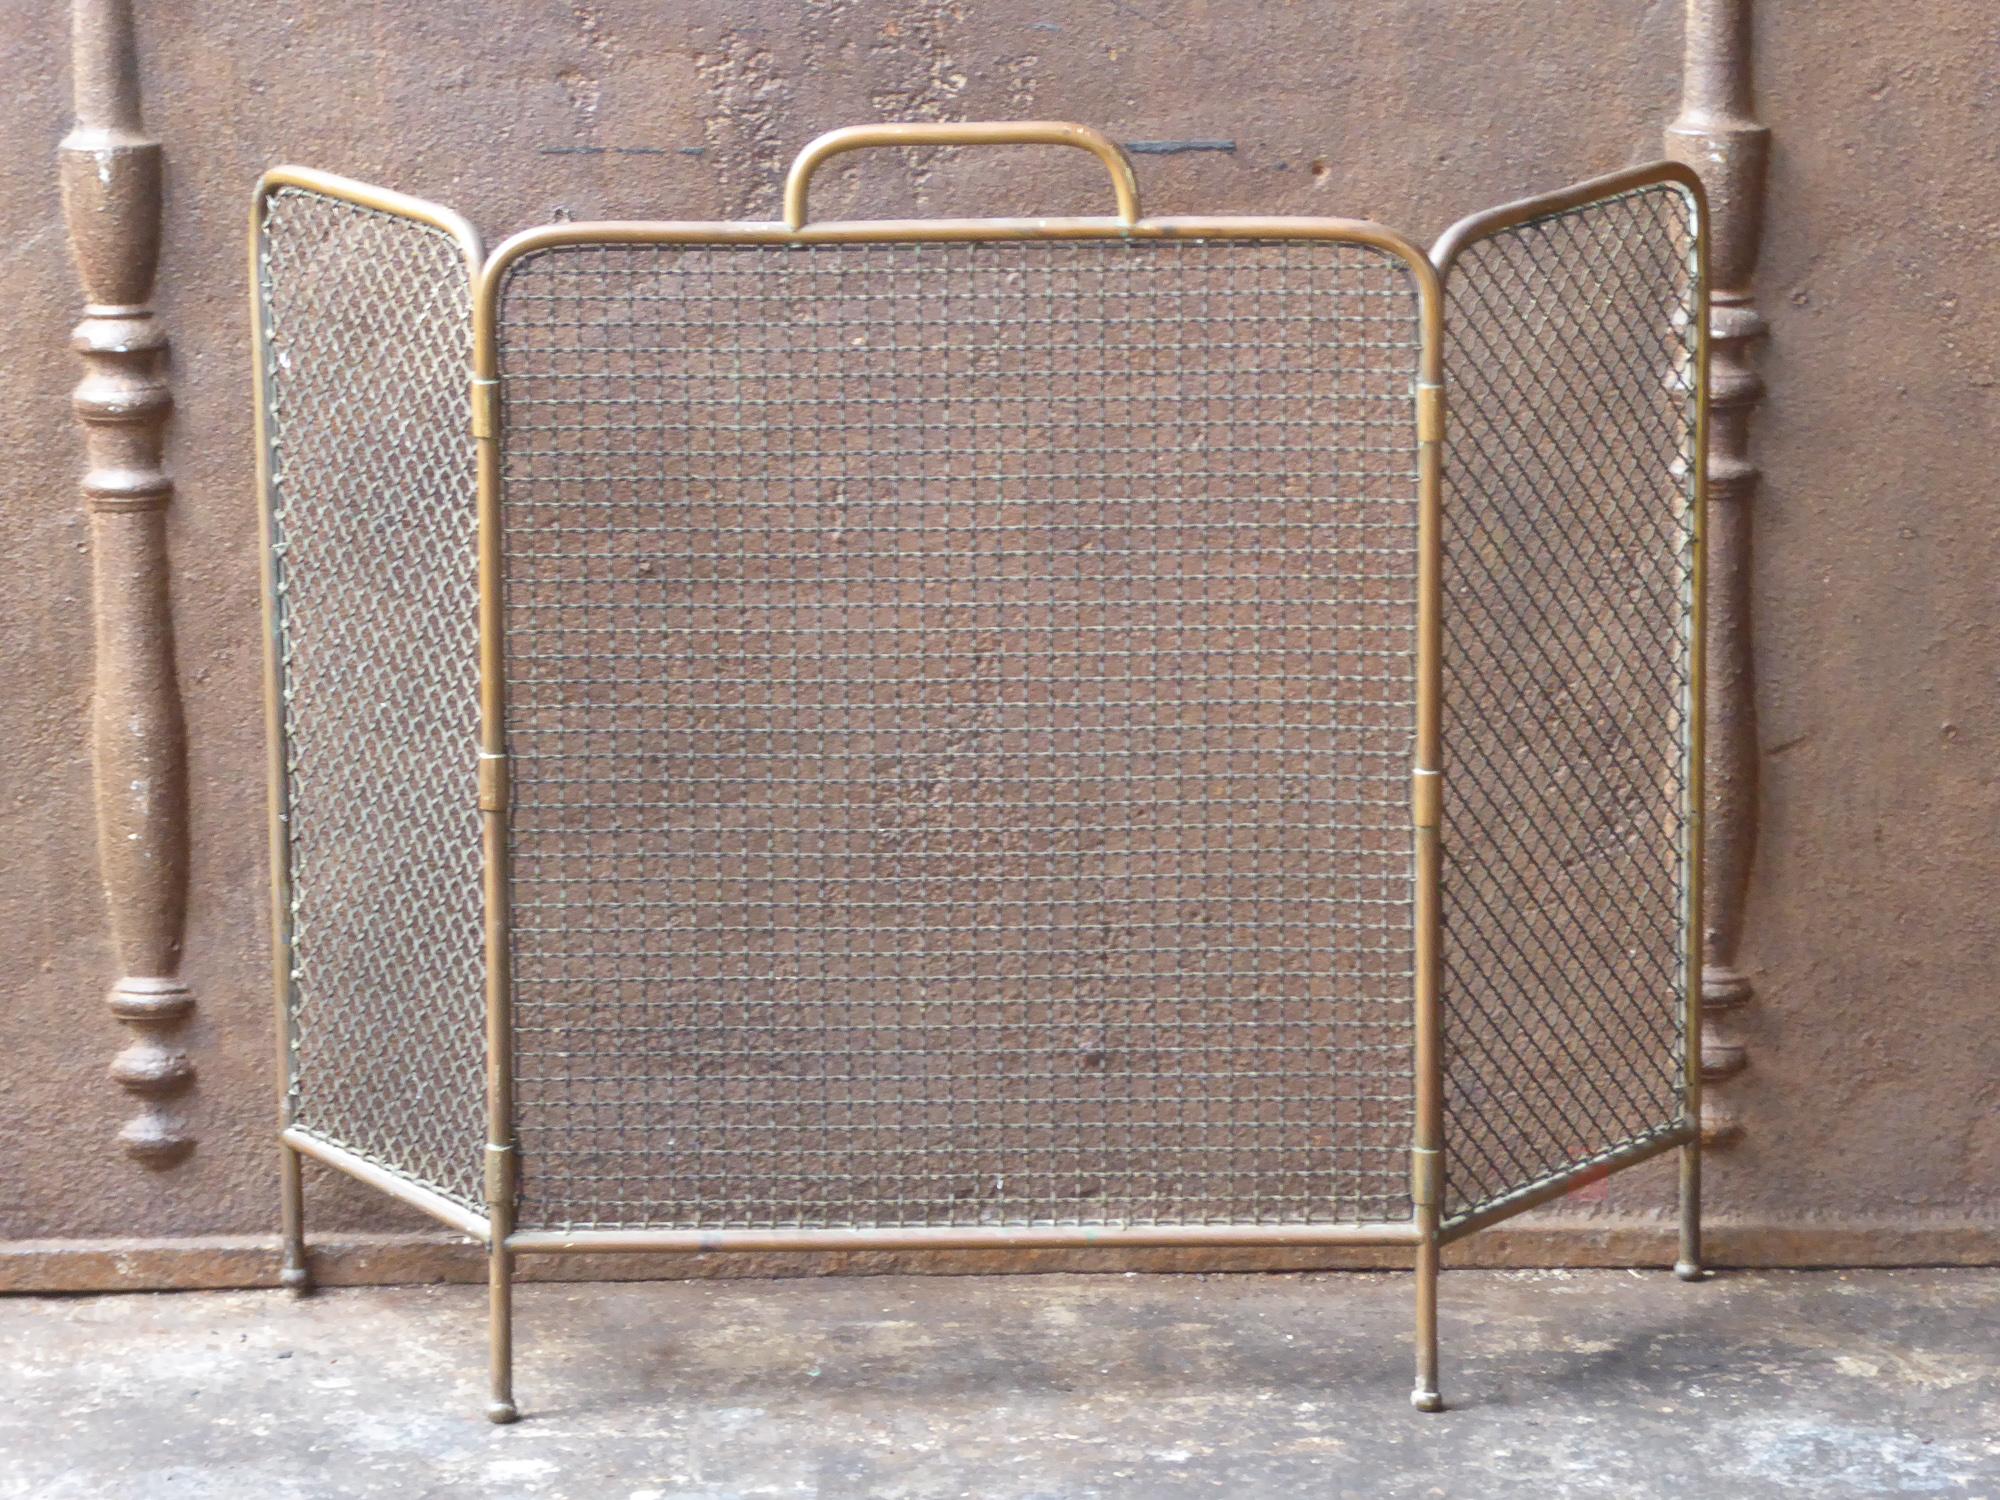 19th century English Victorian fireplace screen made of brass.







